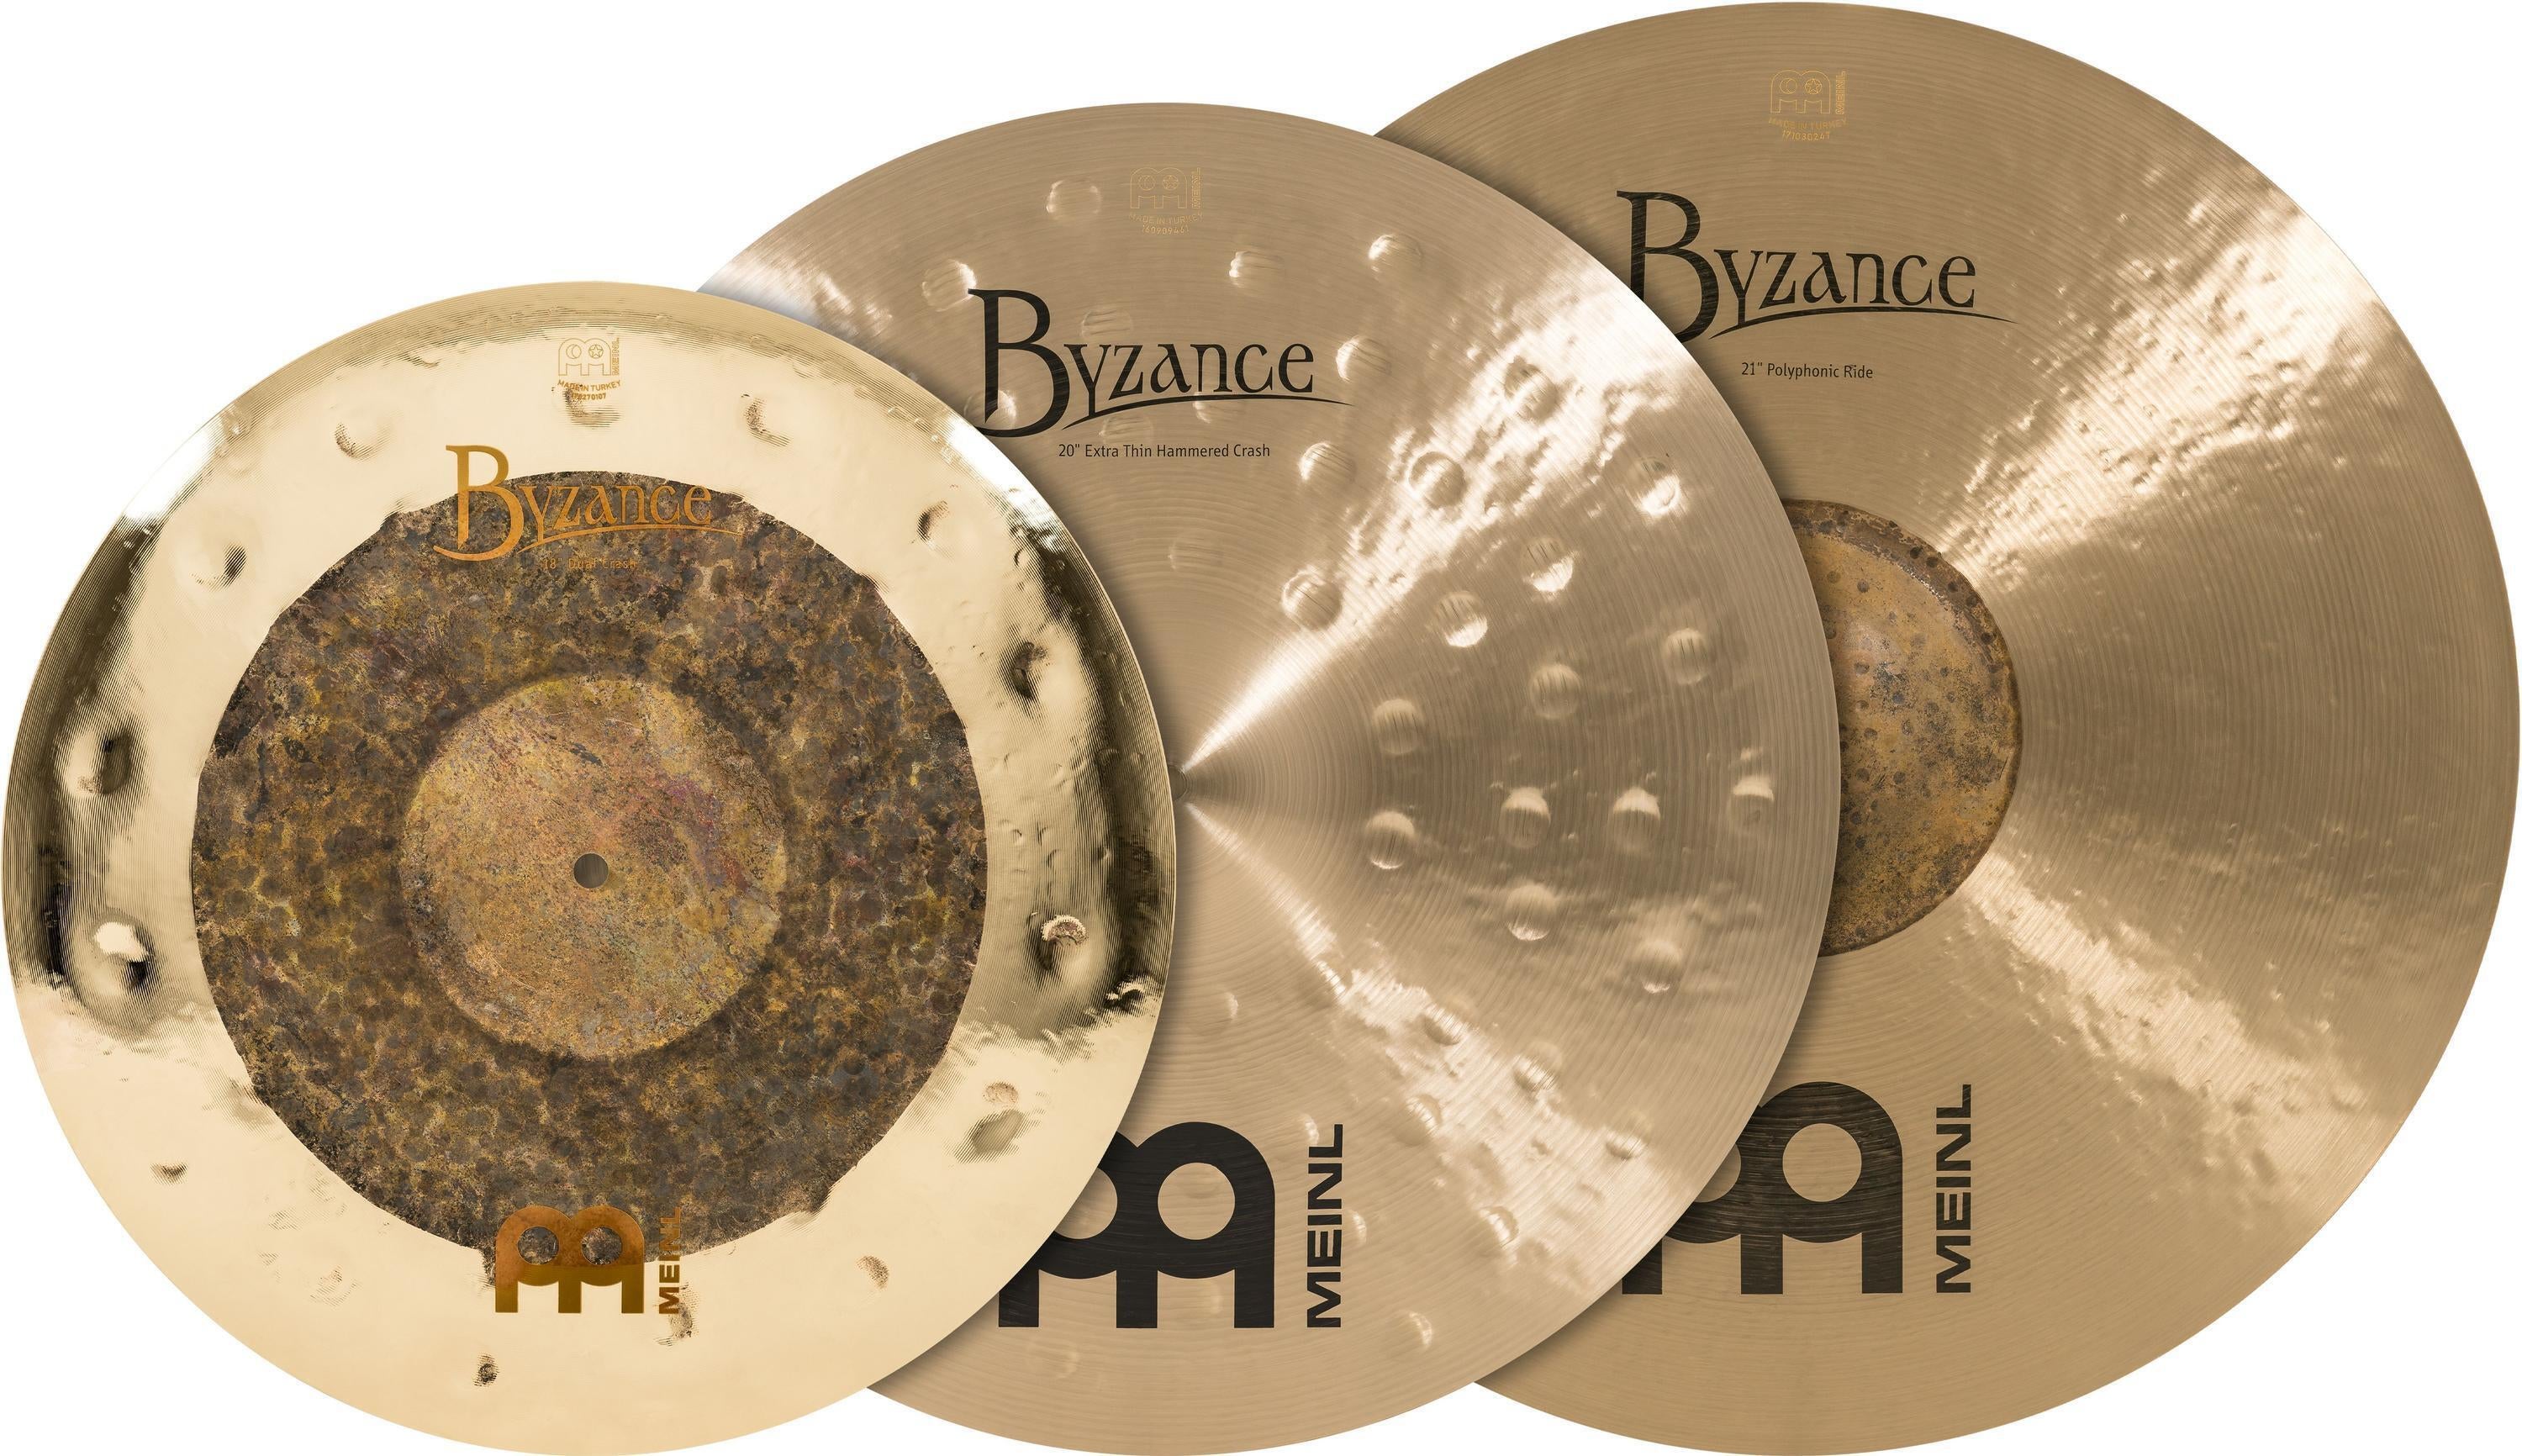 Meinl Cymbals Byzance Mixed Crash Pack - 18 inch Dual, 20 inch, and 21 inch  Ride, Raw/Brilliant and Extra Thin Hammered Traditional